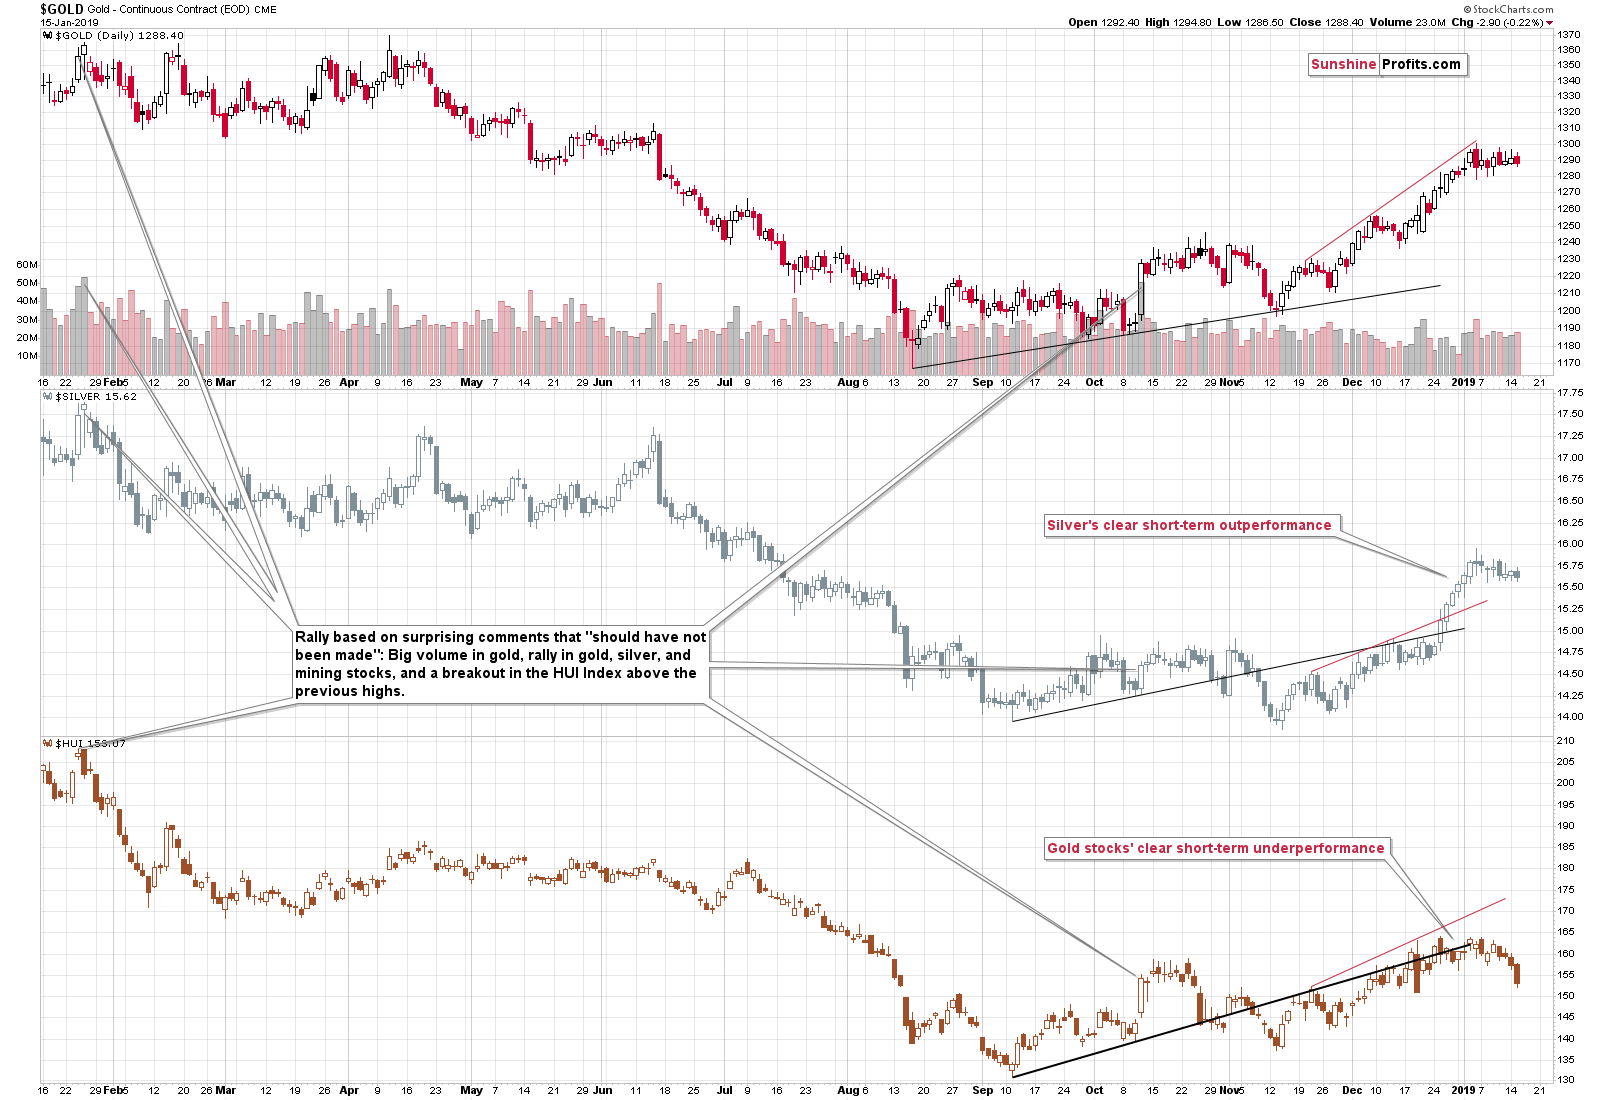 Gold - Continuous Contract